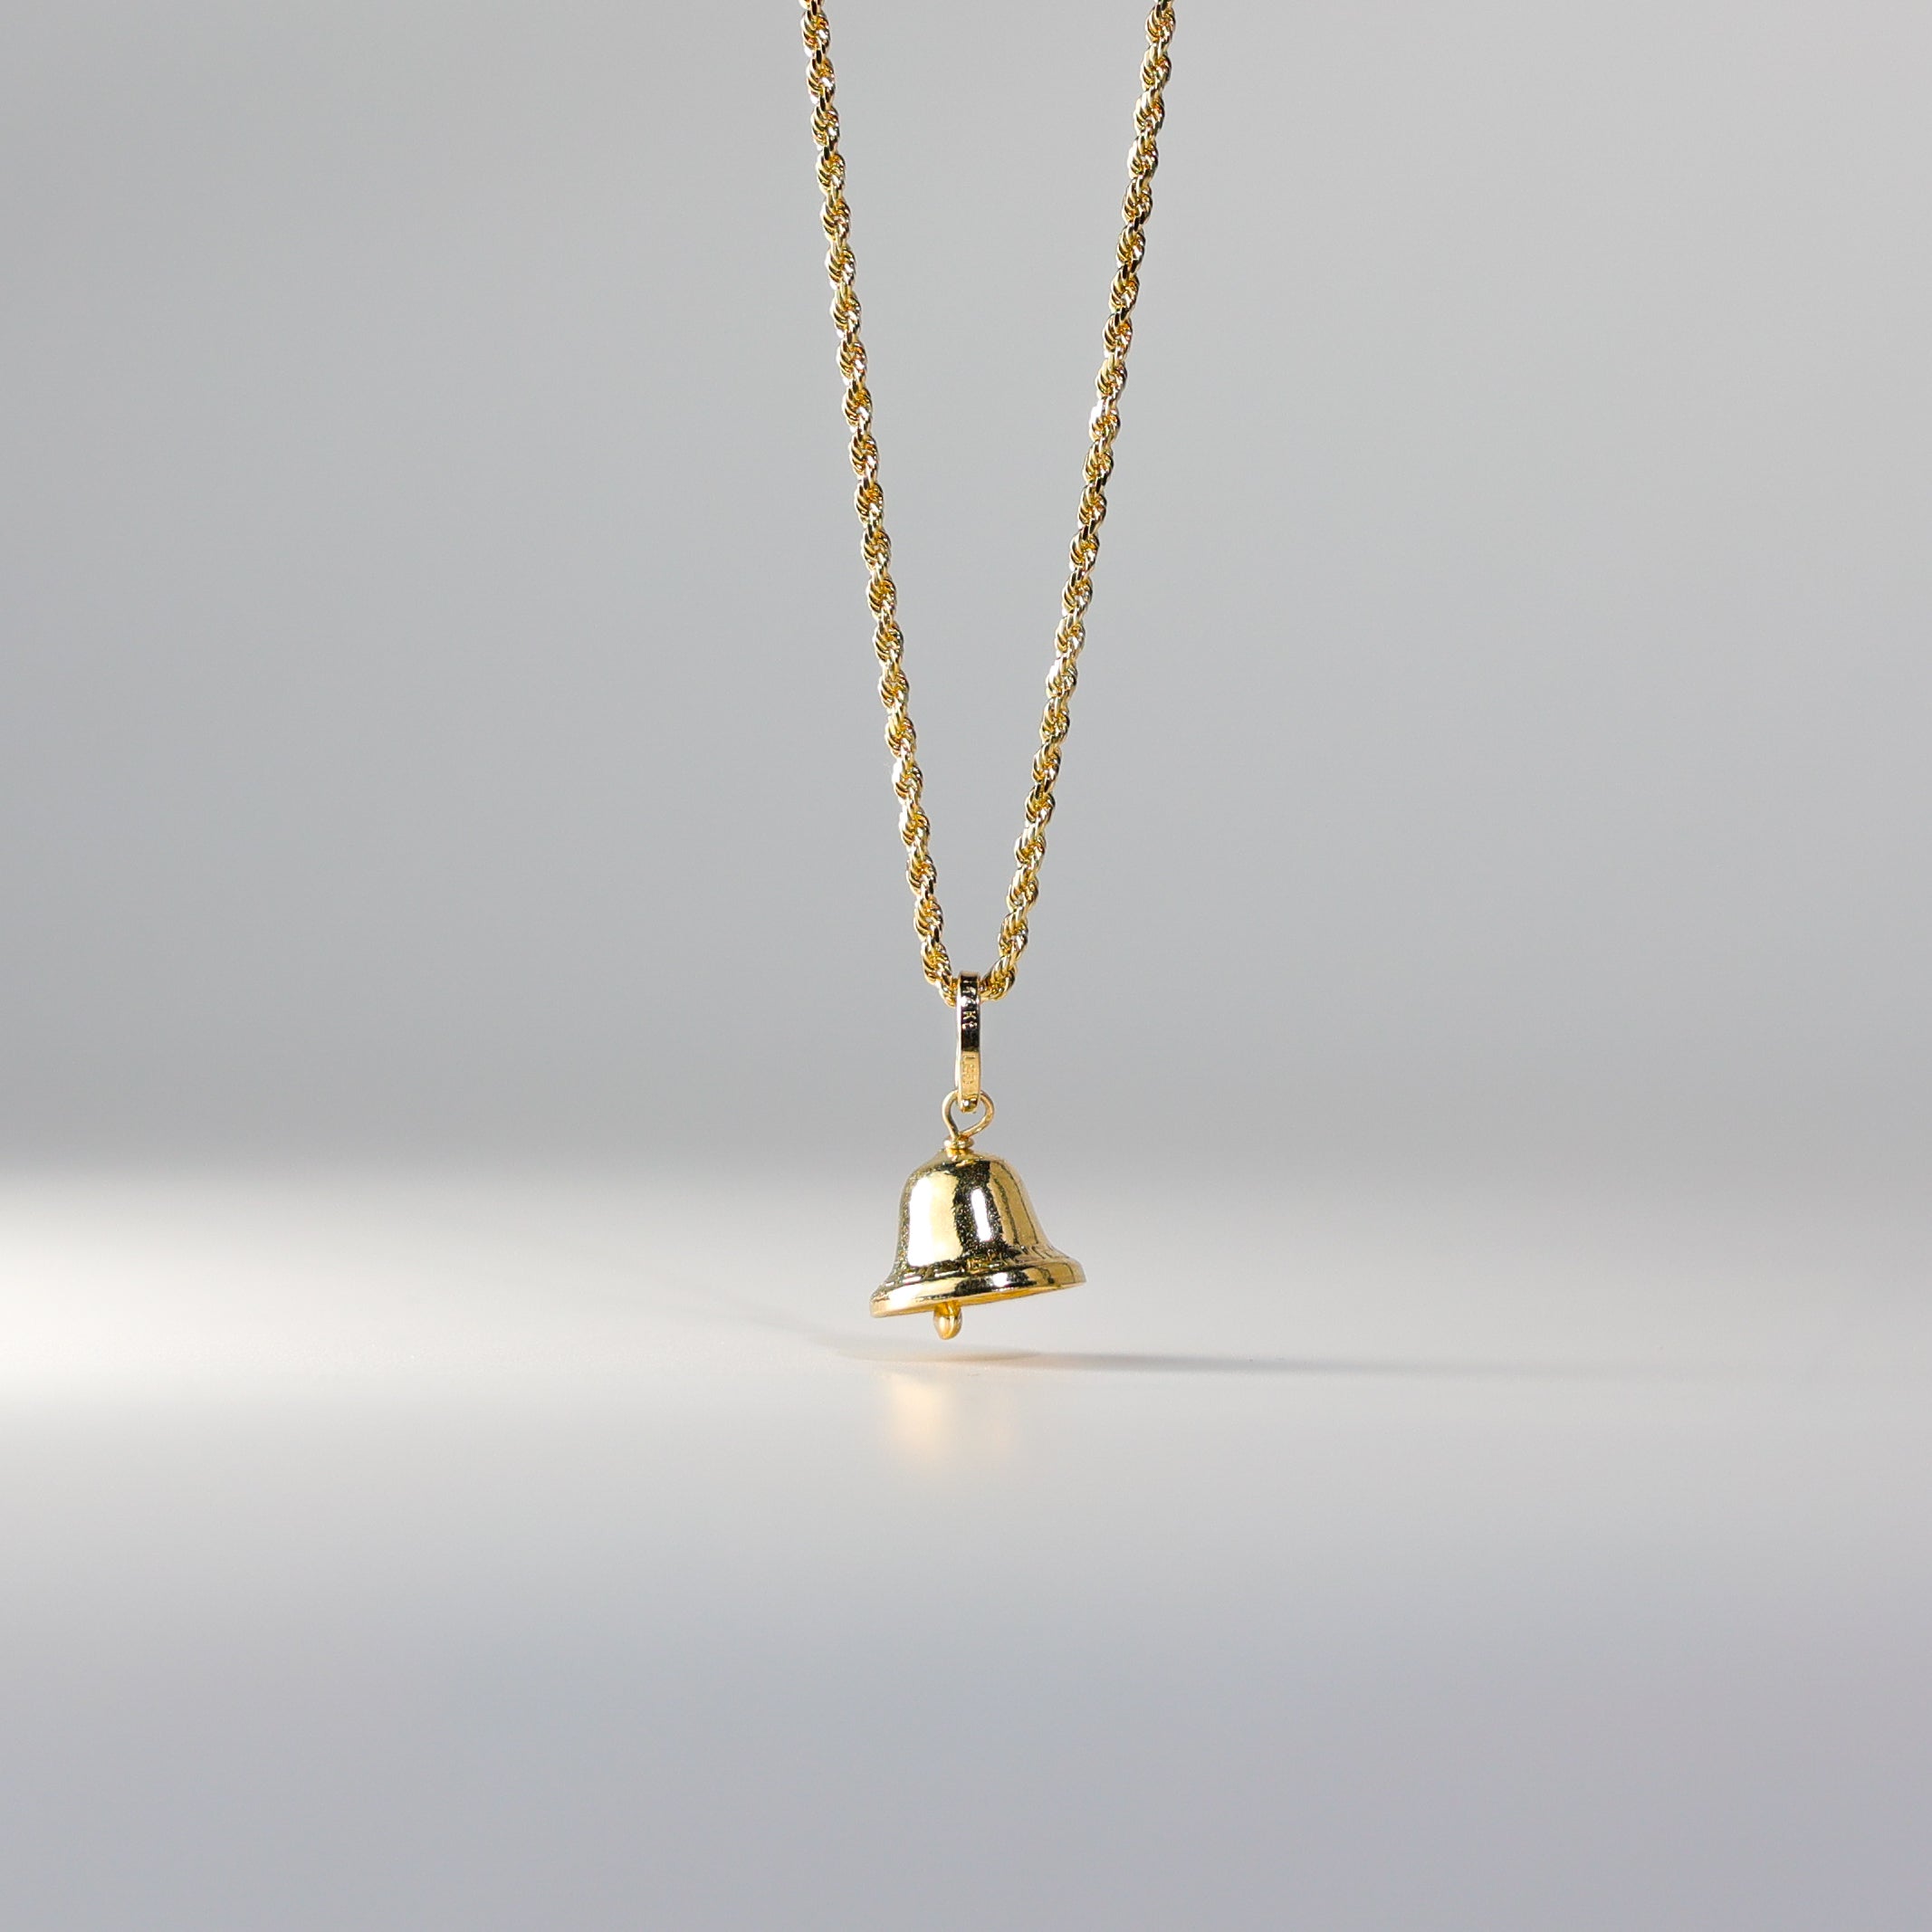 Gold Bell Pendant Model-1713 - Charlie & Co. Jewelry